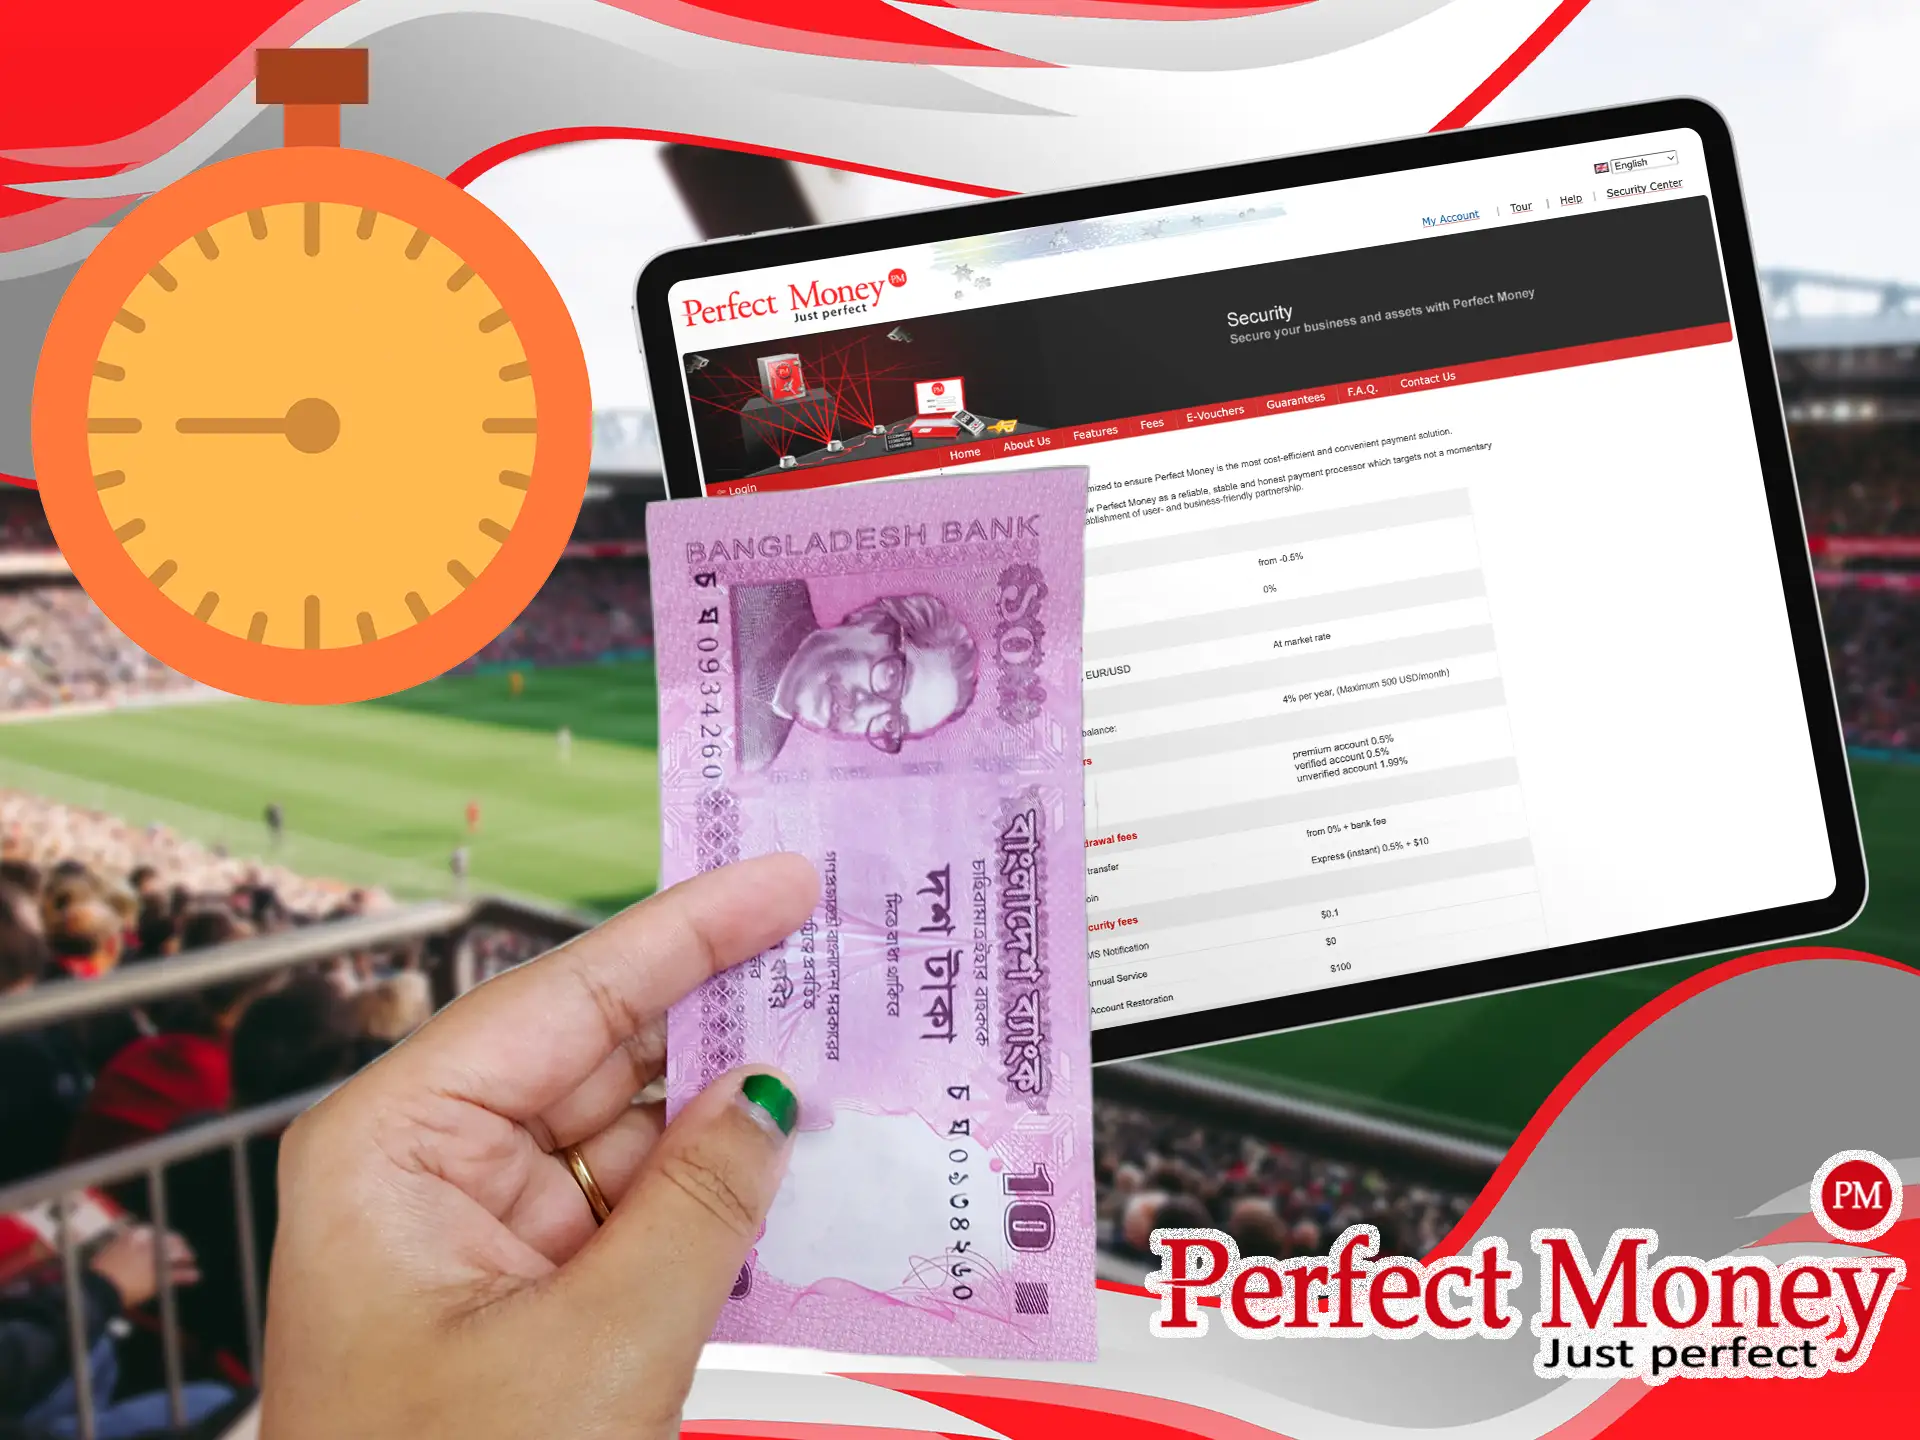 It is important to understand the restrictions for users from Bangladesh when depositing with Perfect Money.